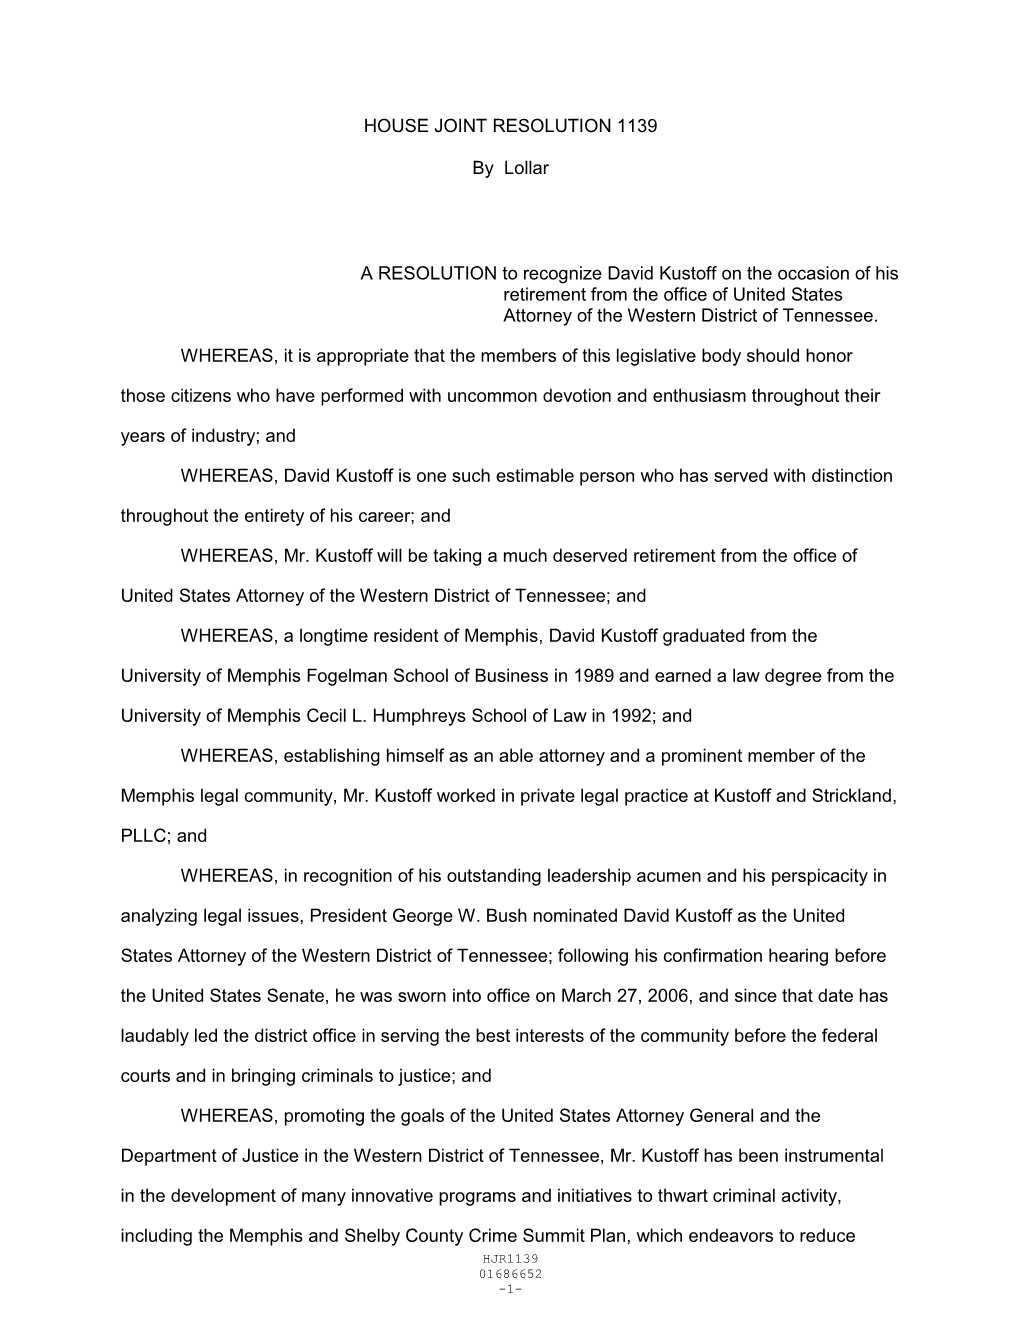 HOUSE JOINT RESOLUTION 1139 by Lollar a RESOLUTION to Recognize David Kustoff on the Occasion of His Retirement from the Offic